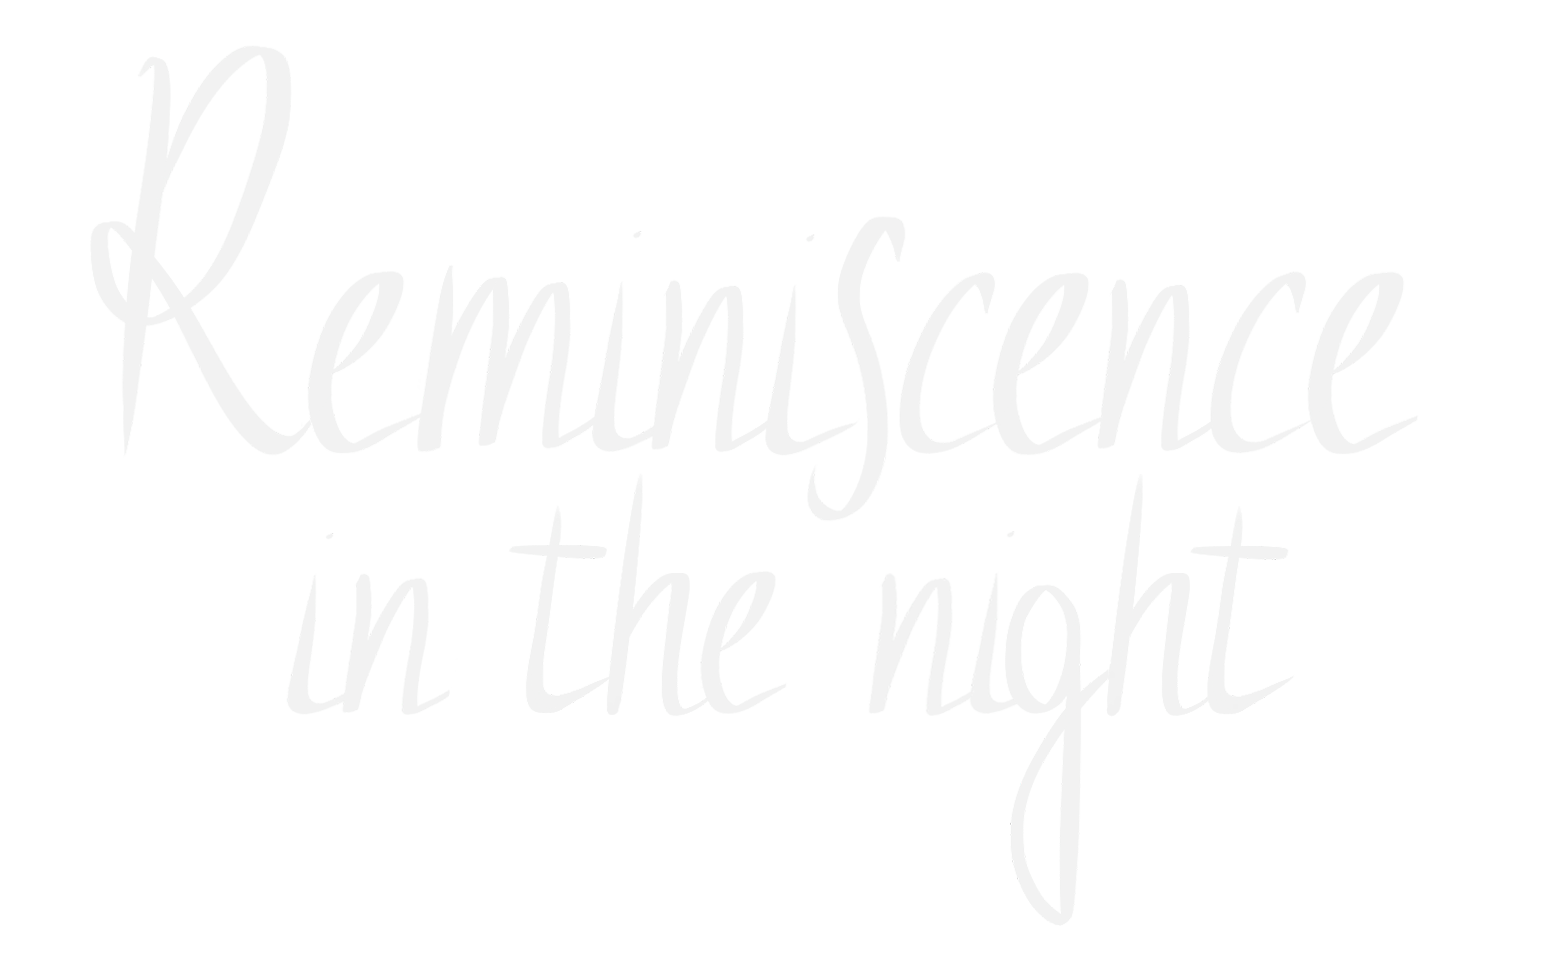 Reminiscence in the Night